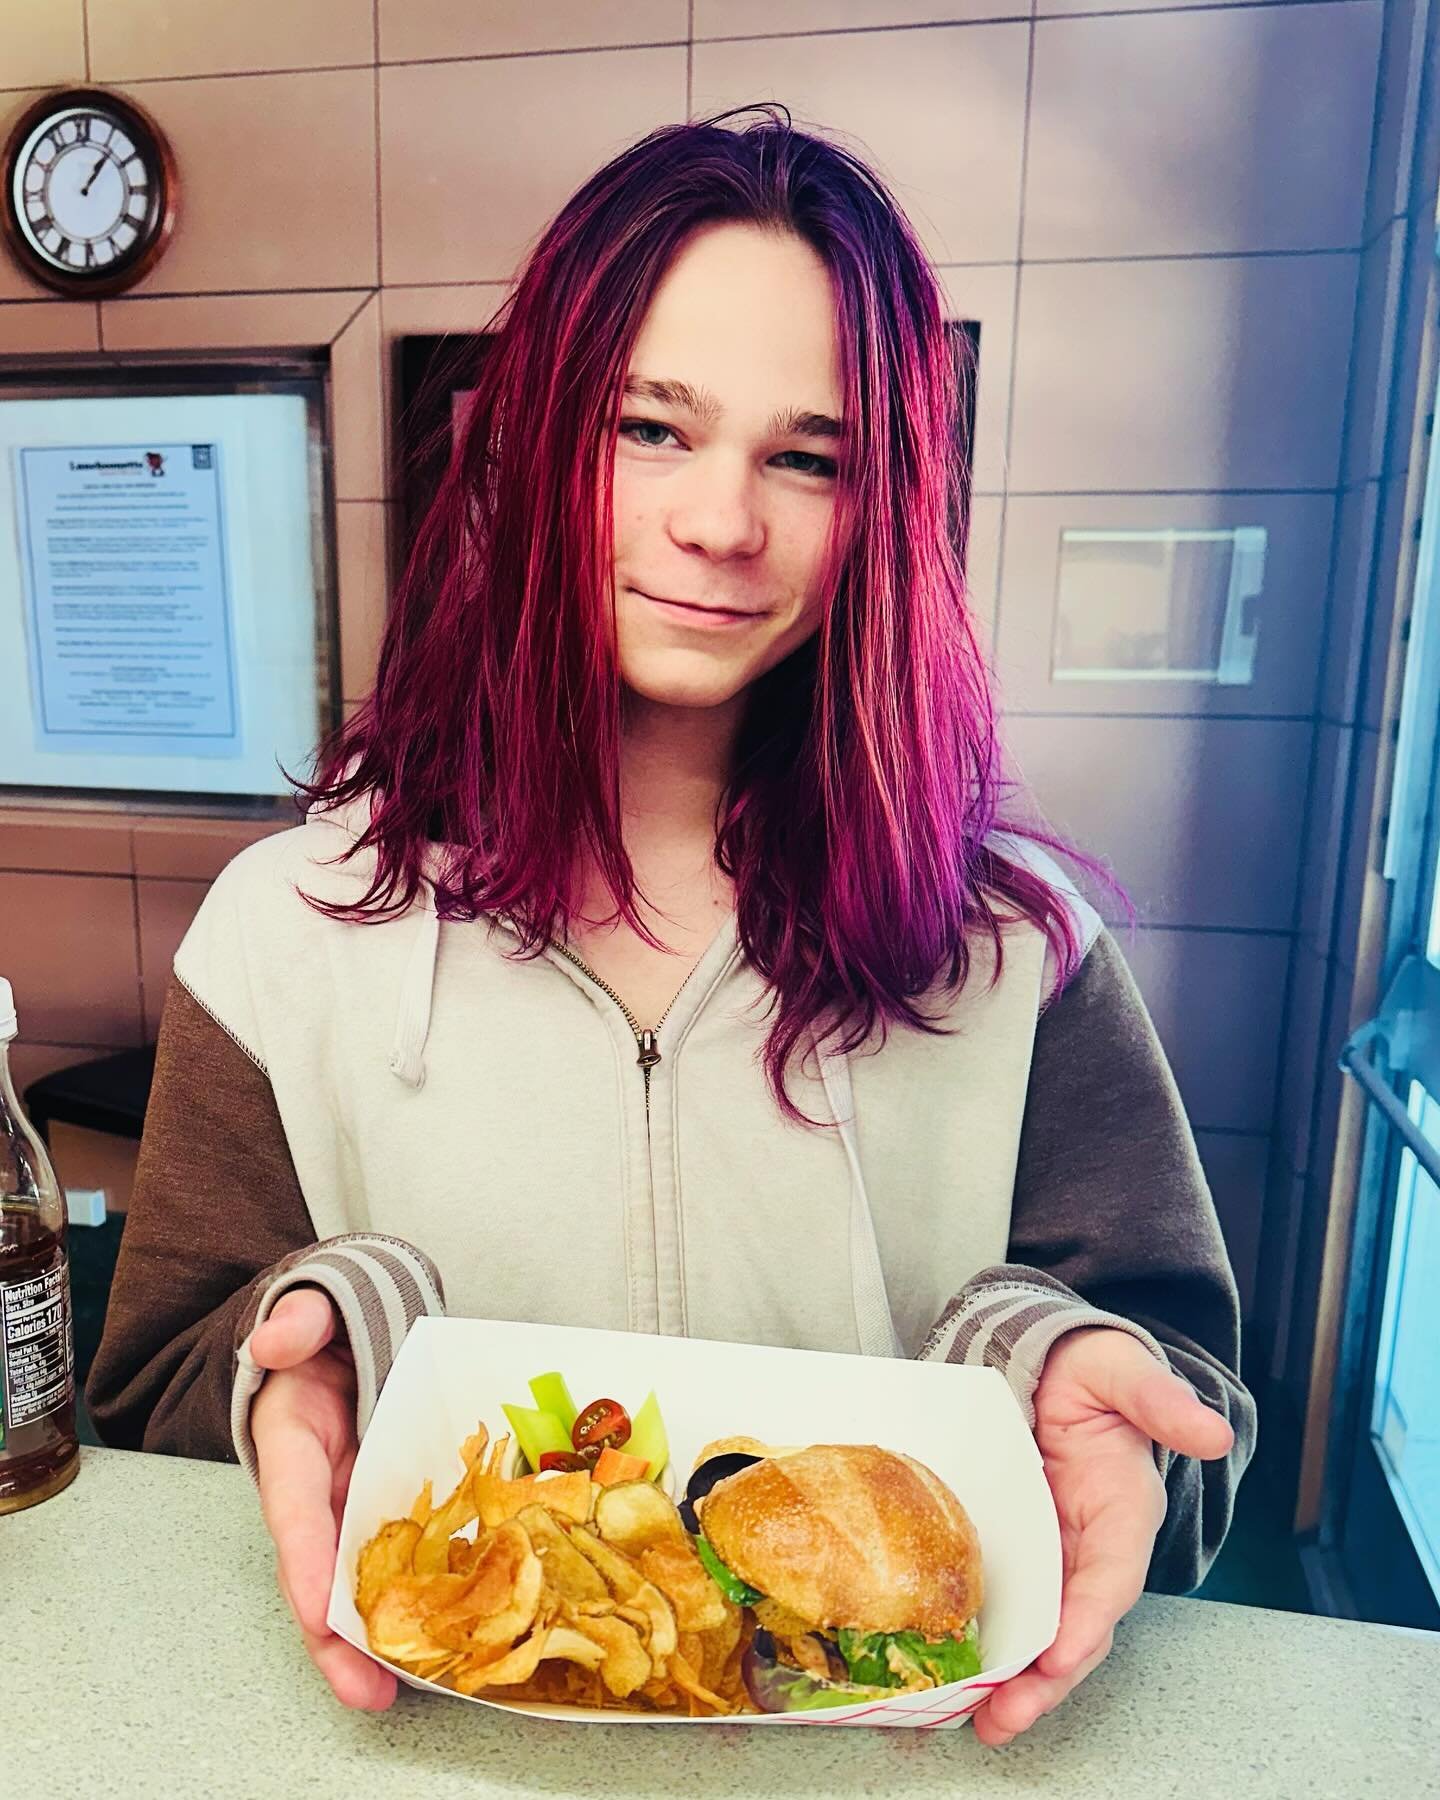 We FEED HANGRY TEENS. Hopefully before they get too hangry. This one is especially kind. 😊 Make your donation today! Link in bio. #feedhangryteens #givingfeelsgood #passionproject #thankyouthankyouthankyou❤️ #happyluncheonette